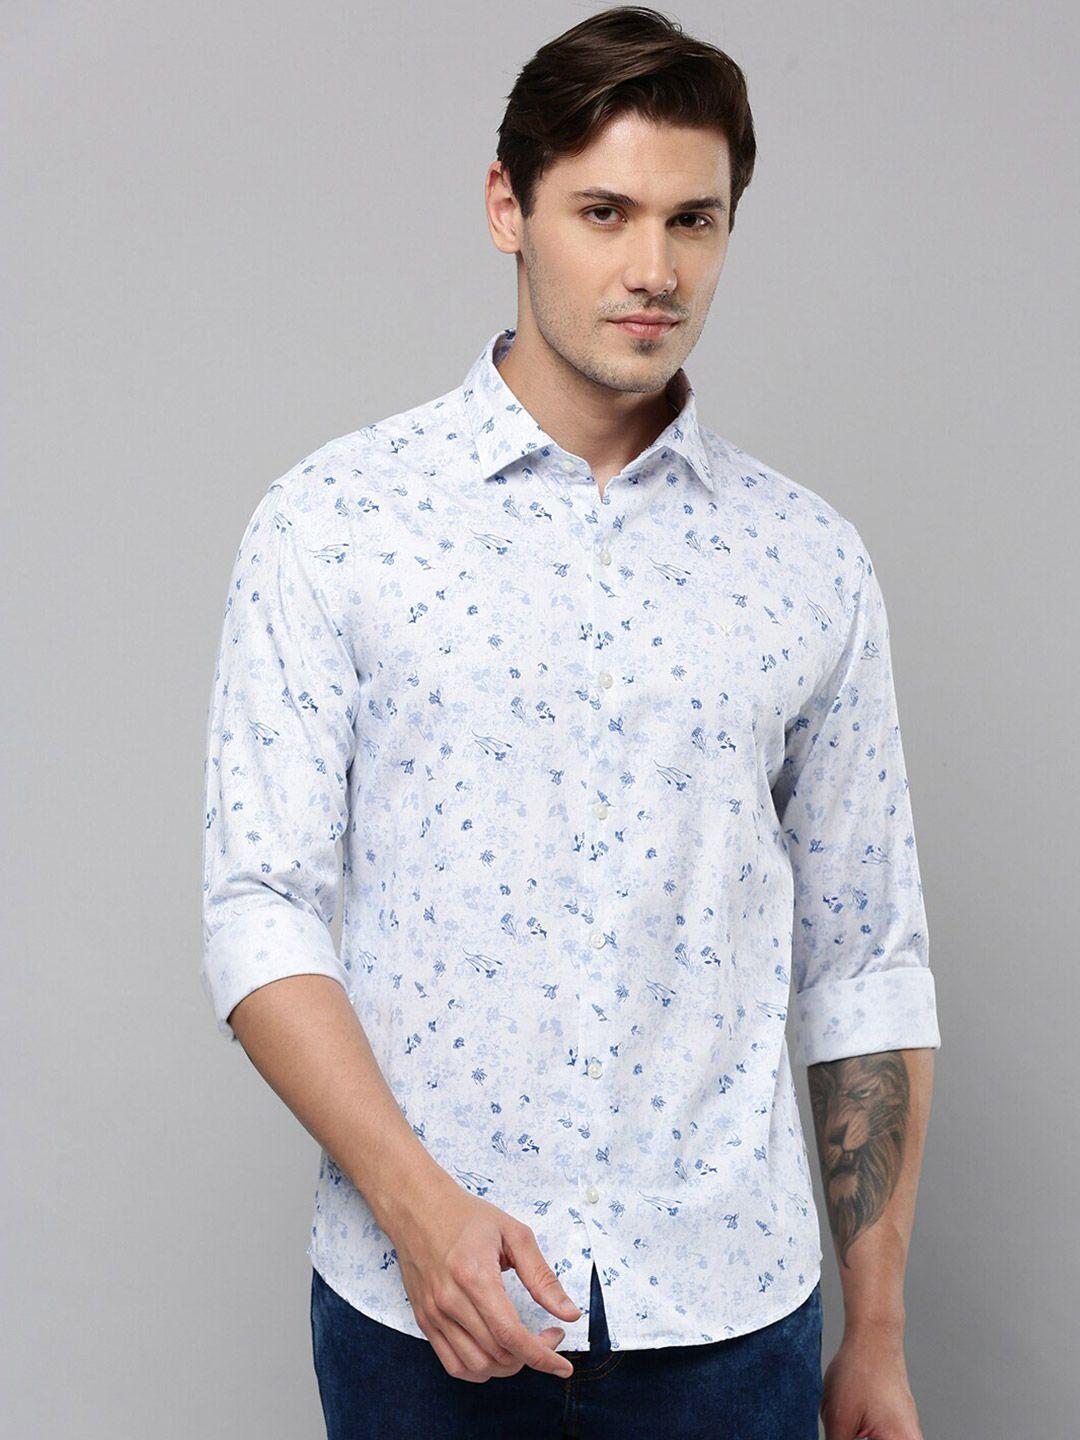 showoff floral printed spread collar comfort cotton casual shirt